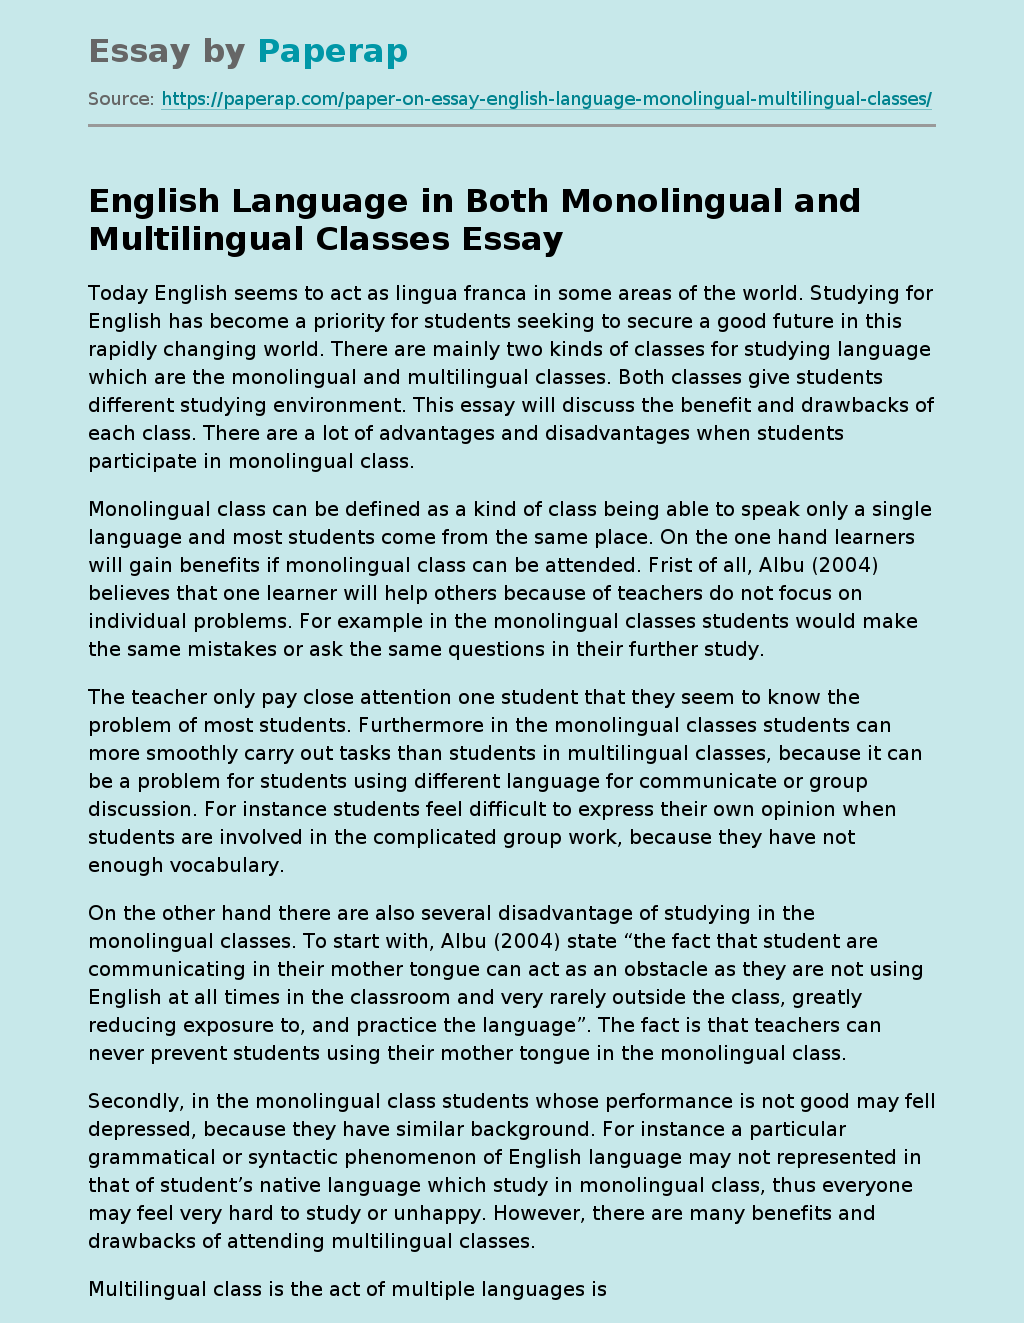 English Language in Both Monolingual and Multilingual Classes